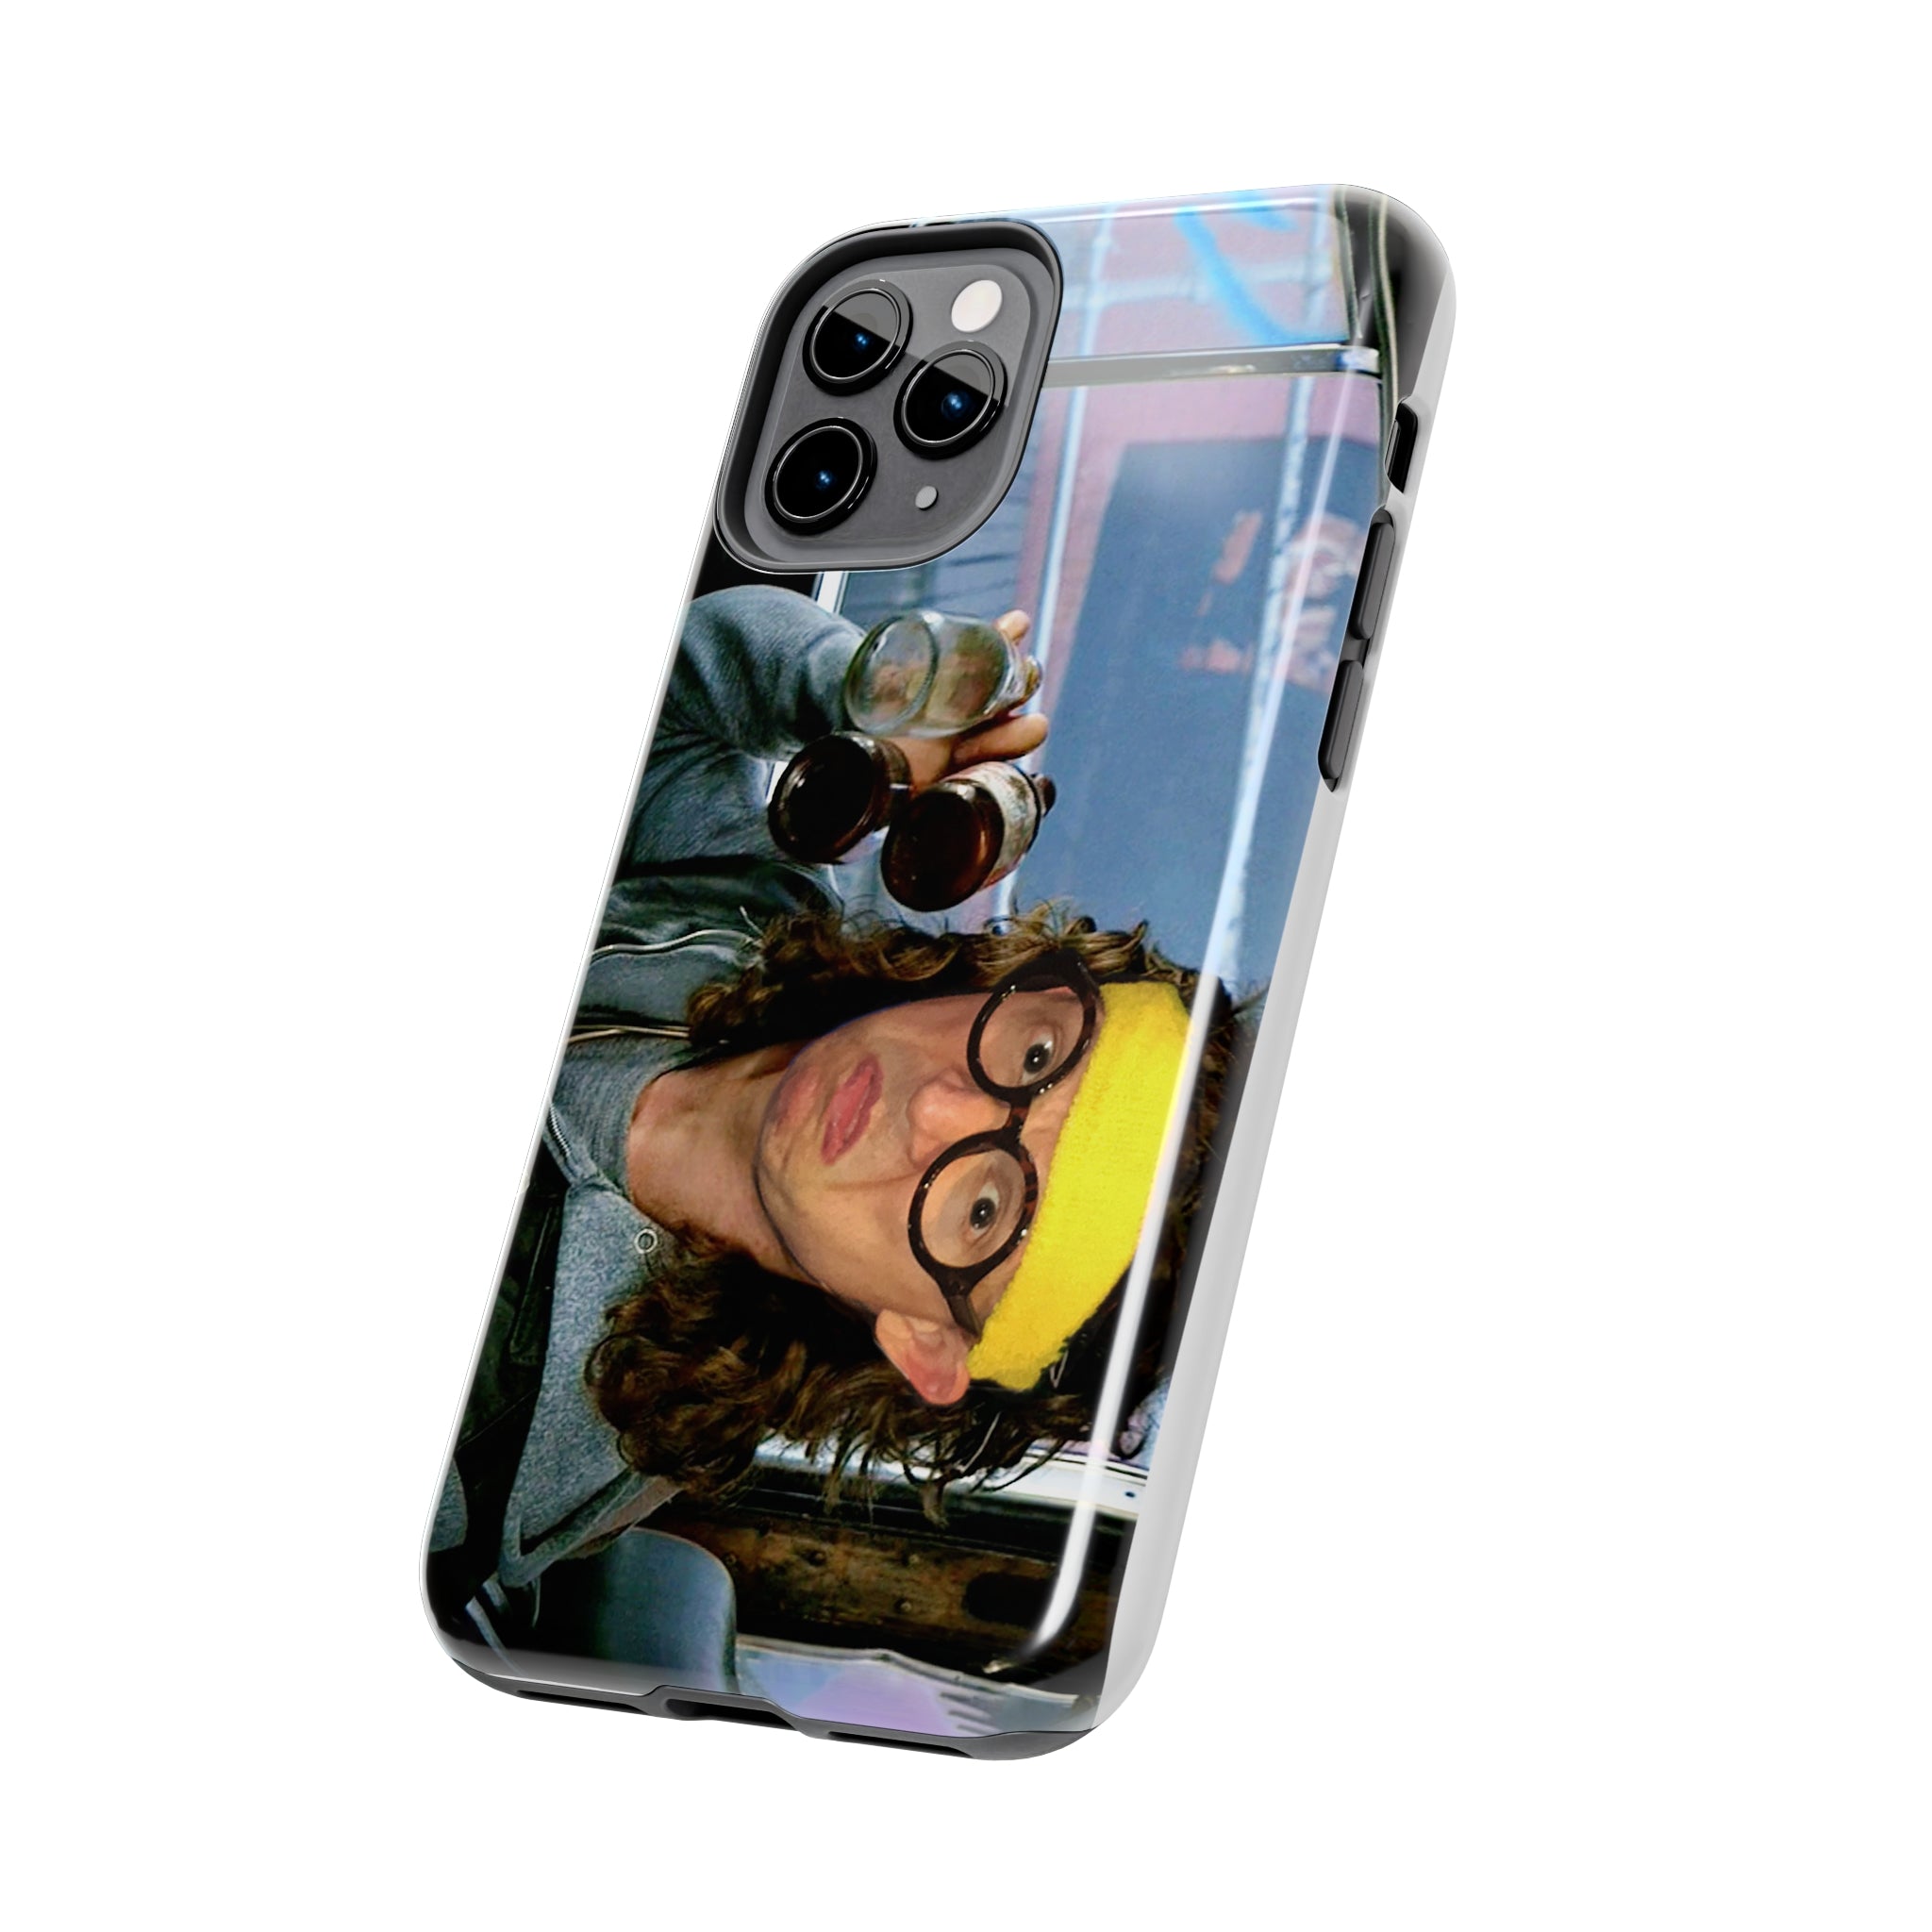 CHIP THE WARRIOR Tough Phone Cases